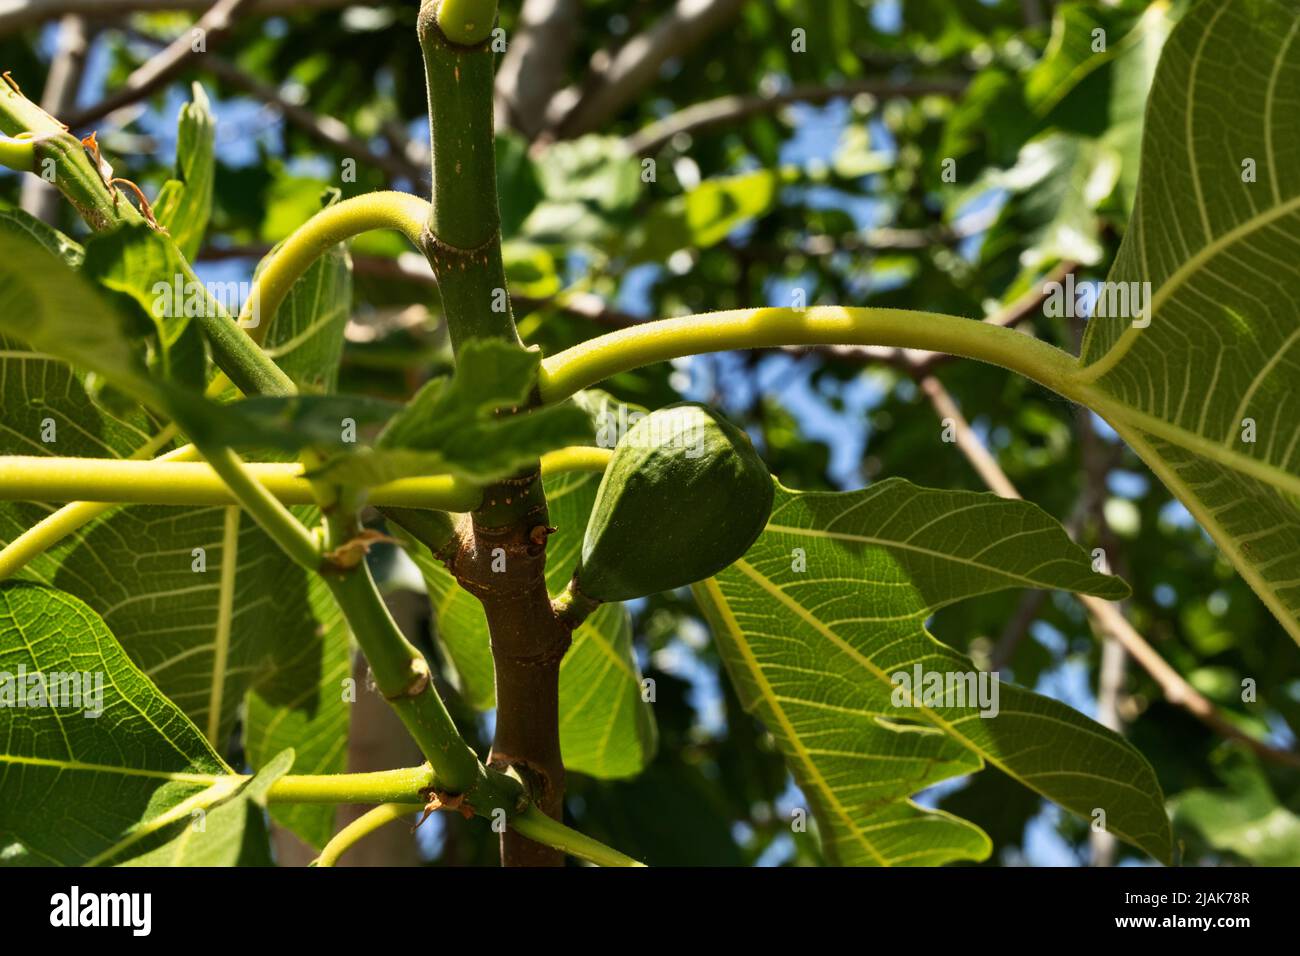 Detail of common fig tree with unripe fruit Stock Photo